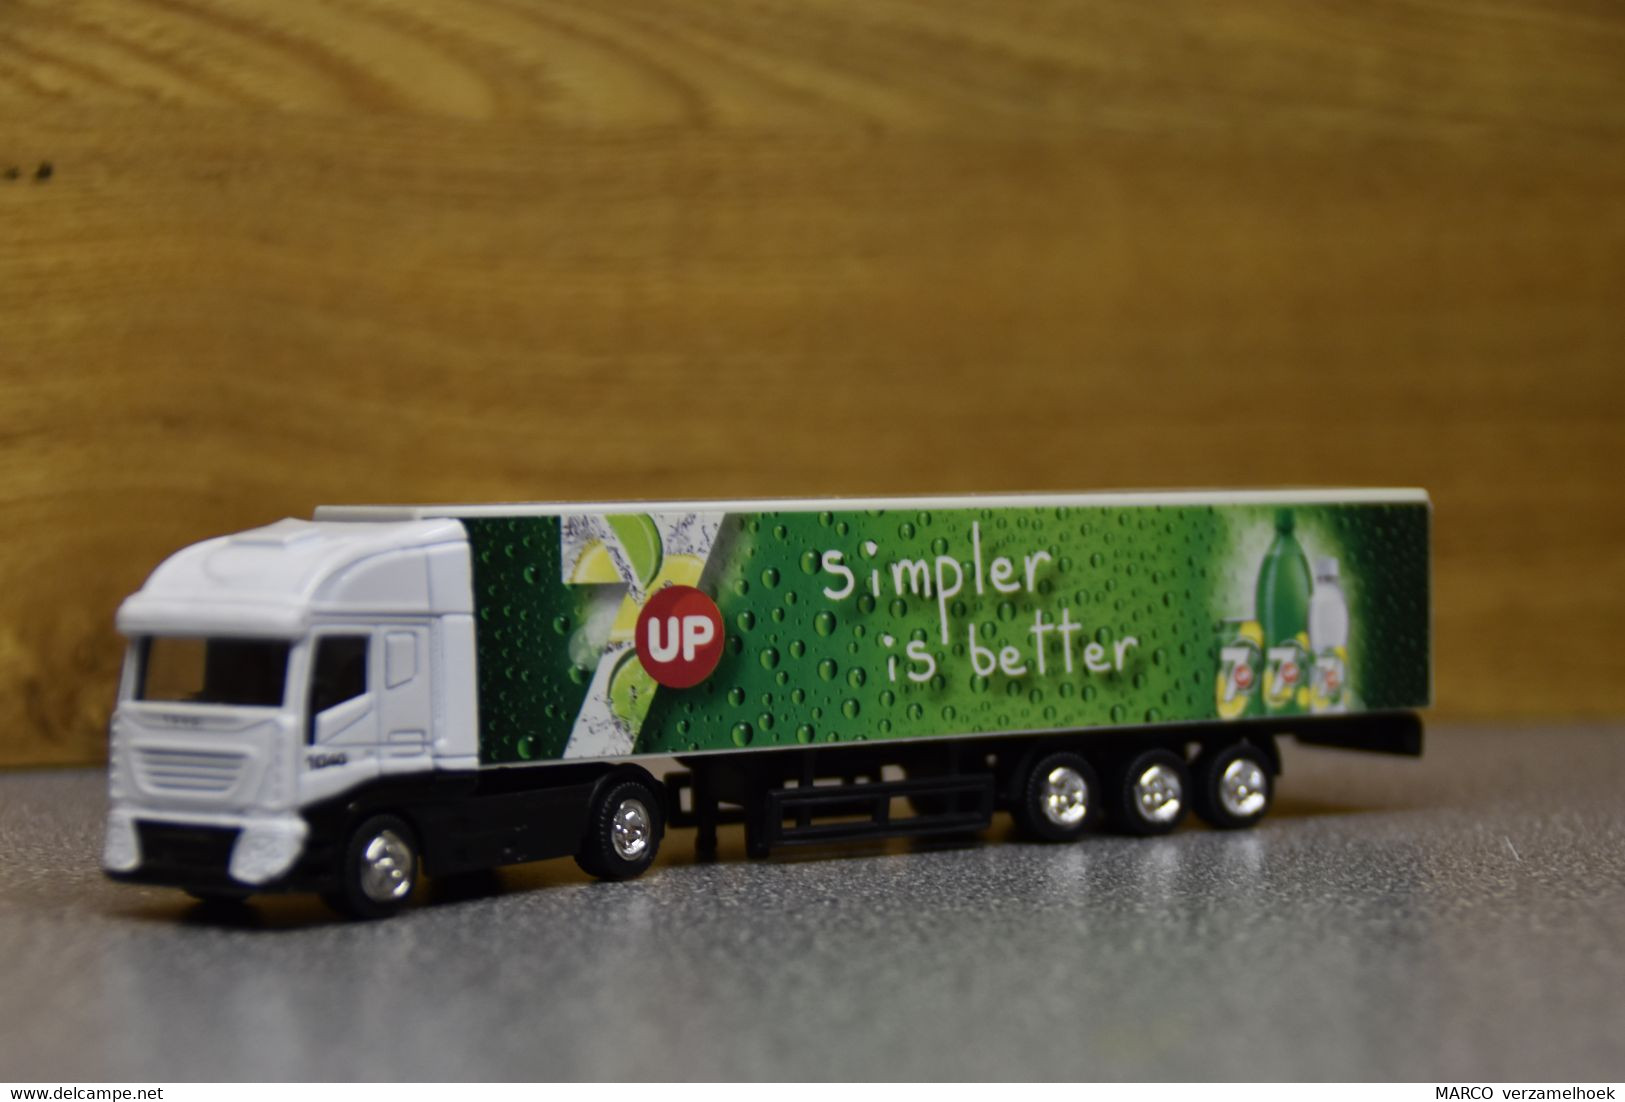 Truck 1040 7up Pepsico-Dr Pepper Snapple Group Scale 1:87 - Echelle 1:87